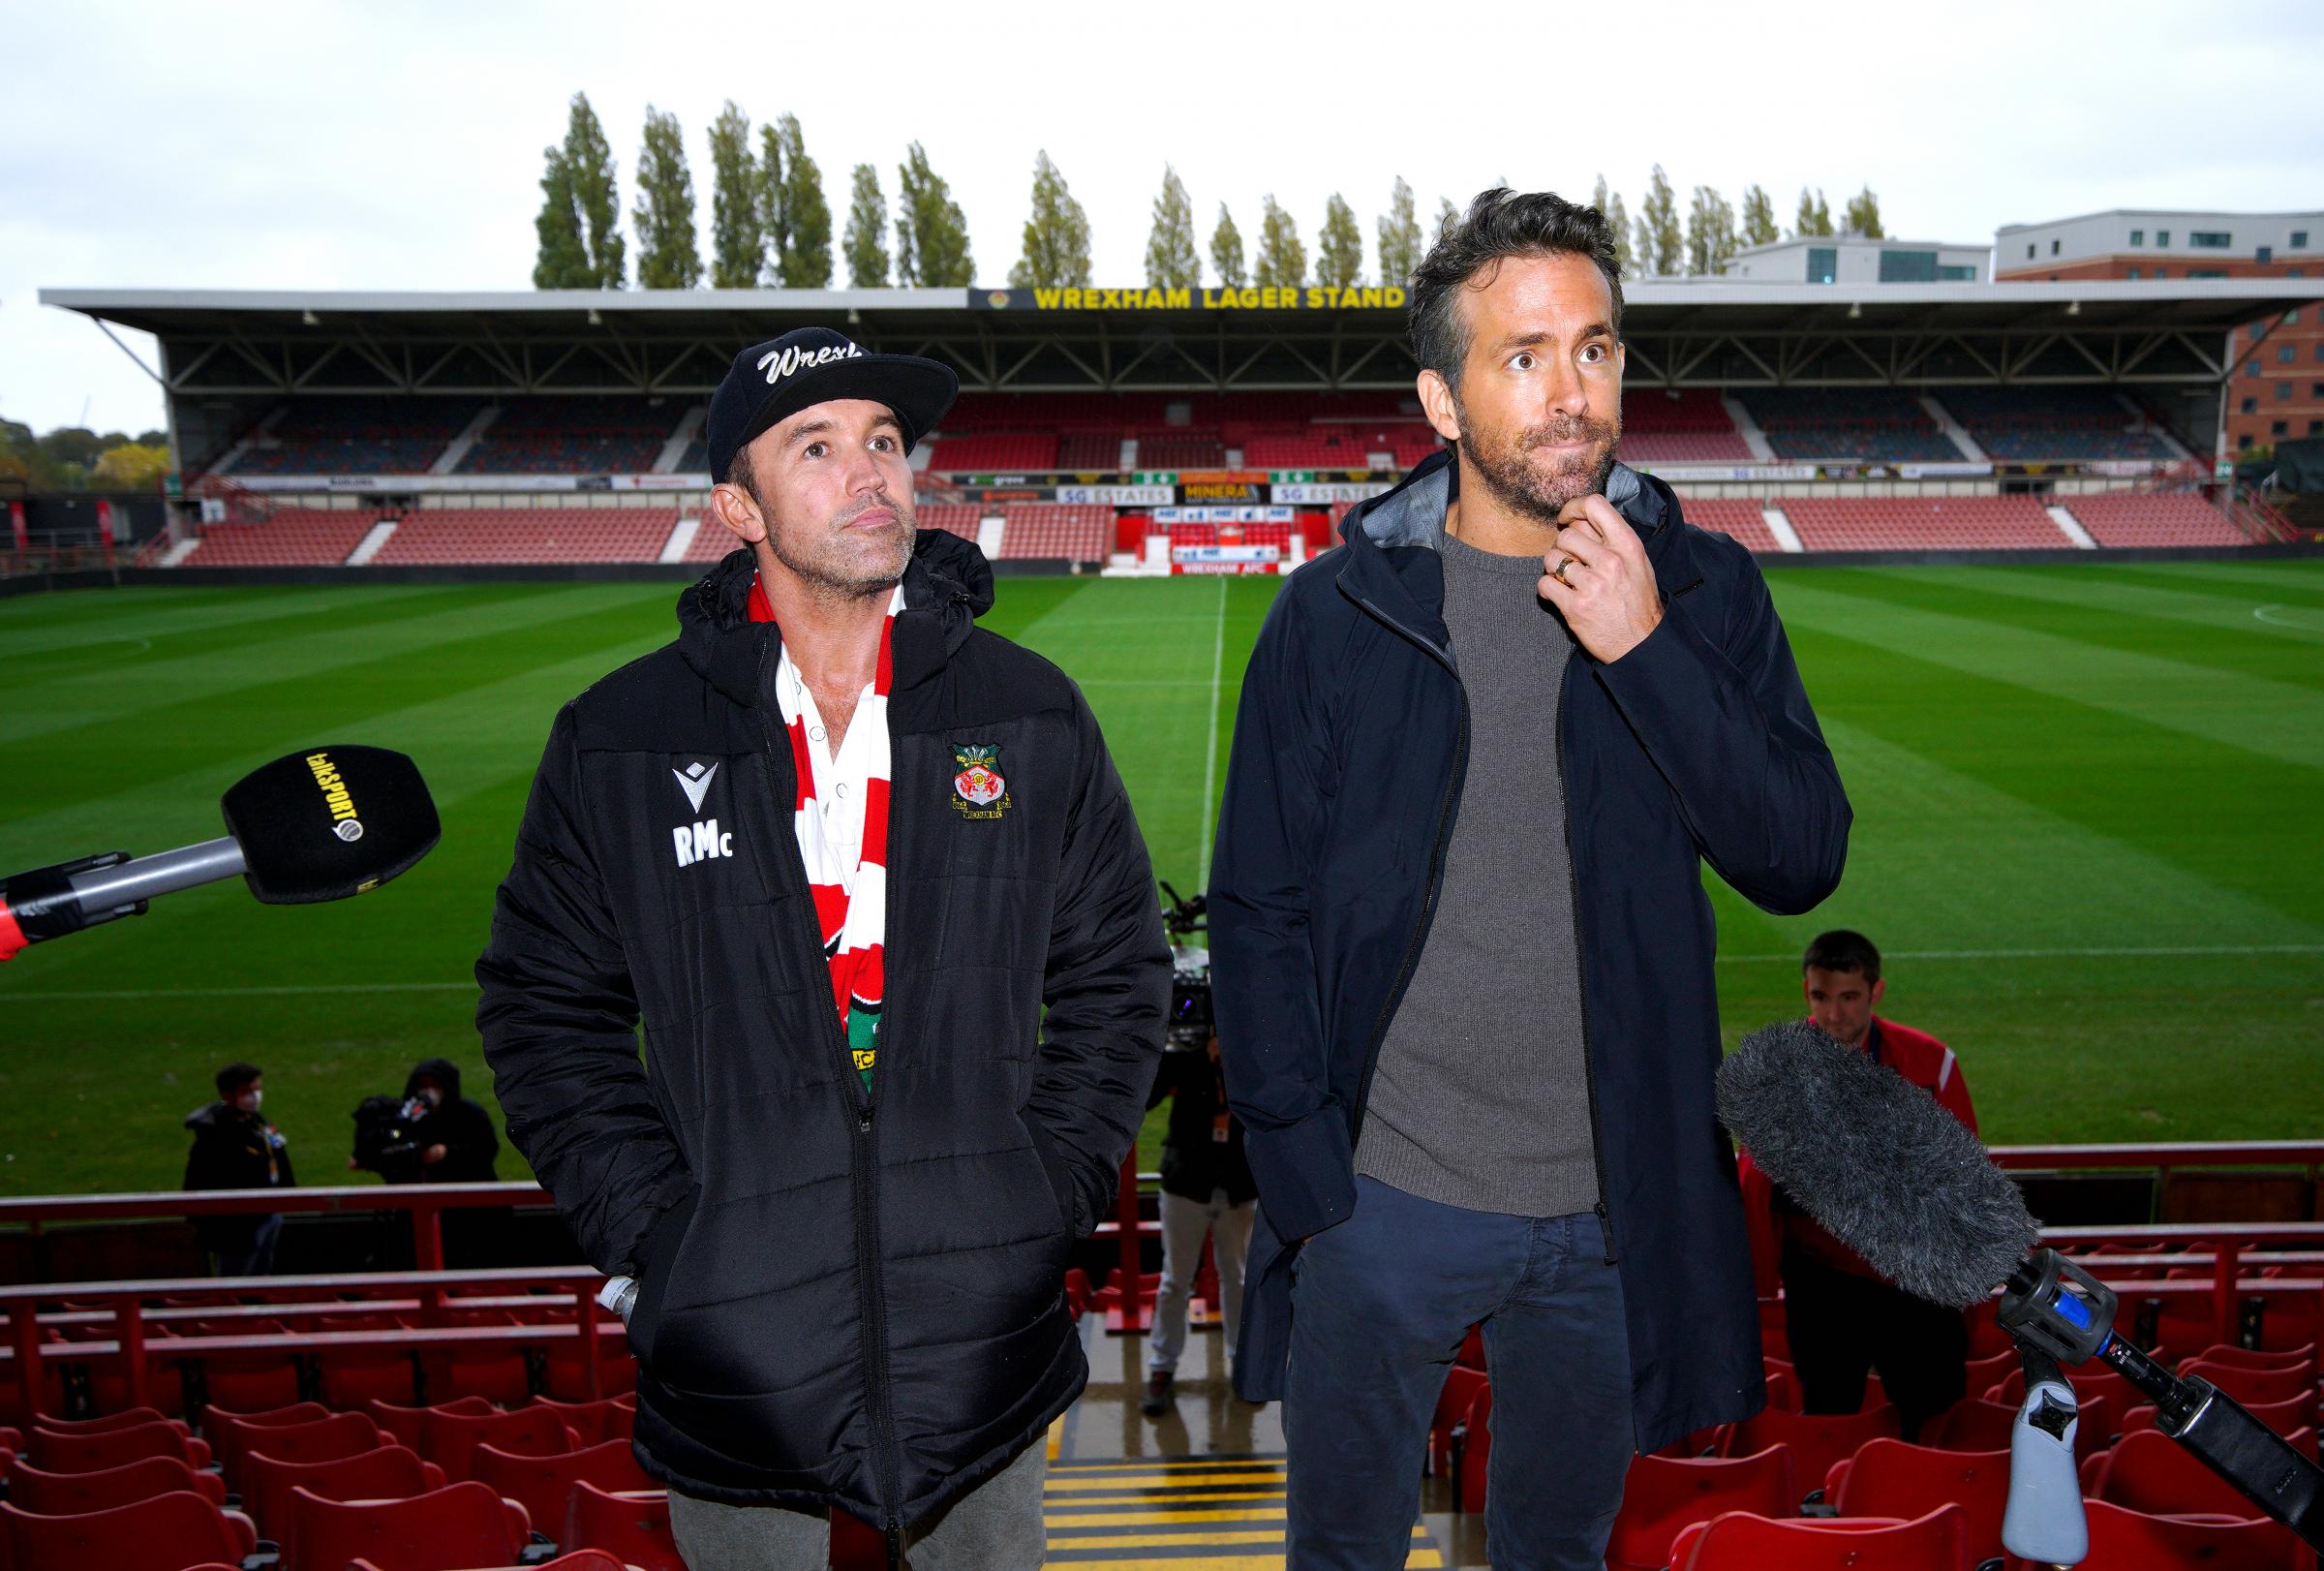 Wrexham co-chairmen Rob McElhenney and Ryan Reynolds during a press conference at the Racecourse Ground, Wrexham. Picture date: Thursday October 28, 2021.